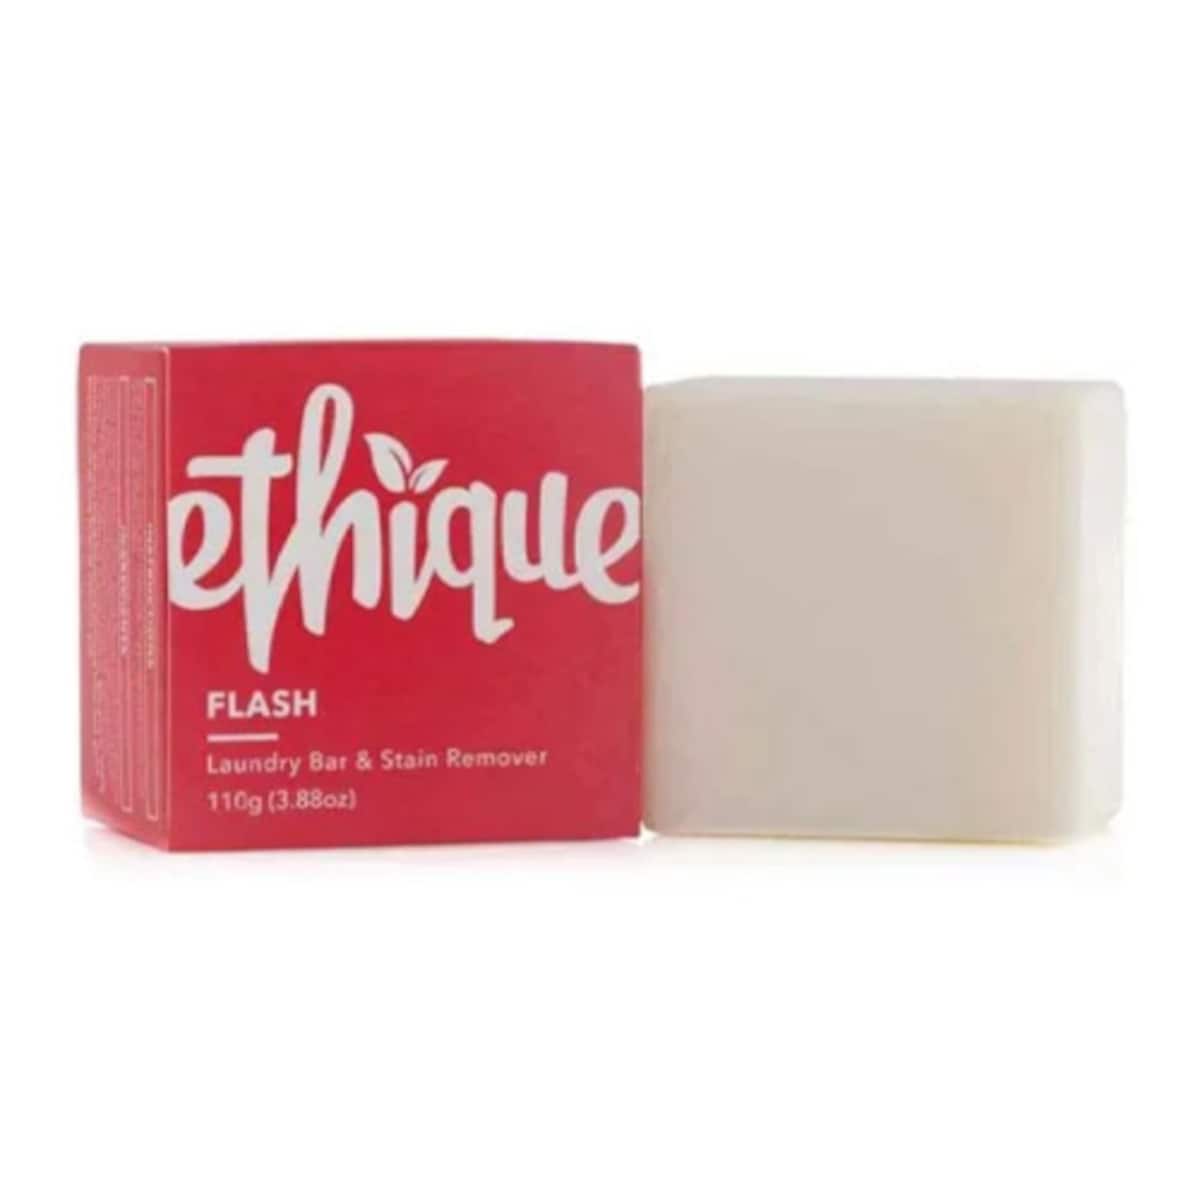 Ethique Solid Laundry Bar & Stain Remover Flash 110G